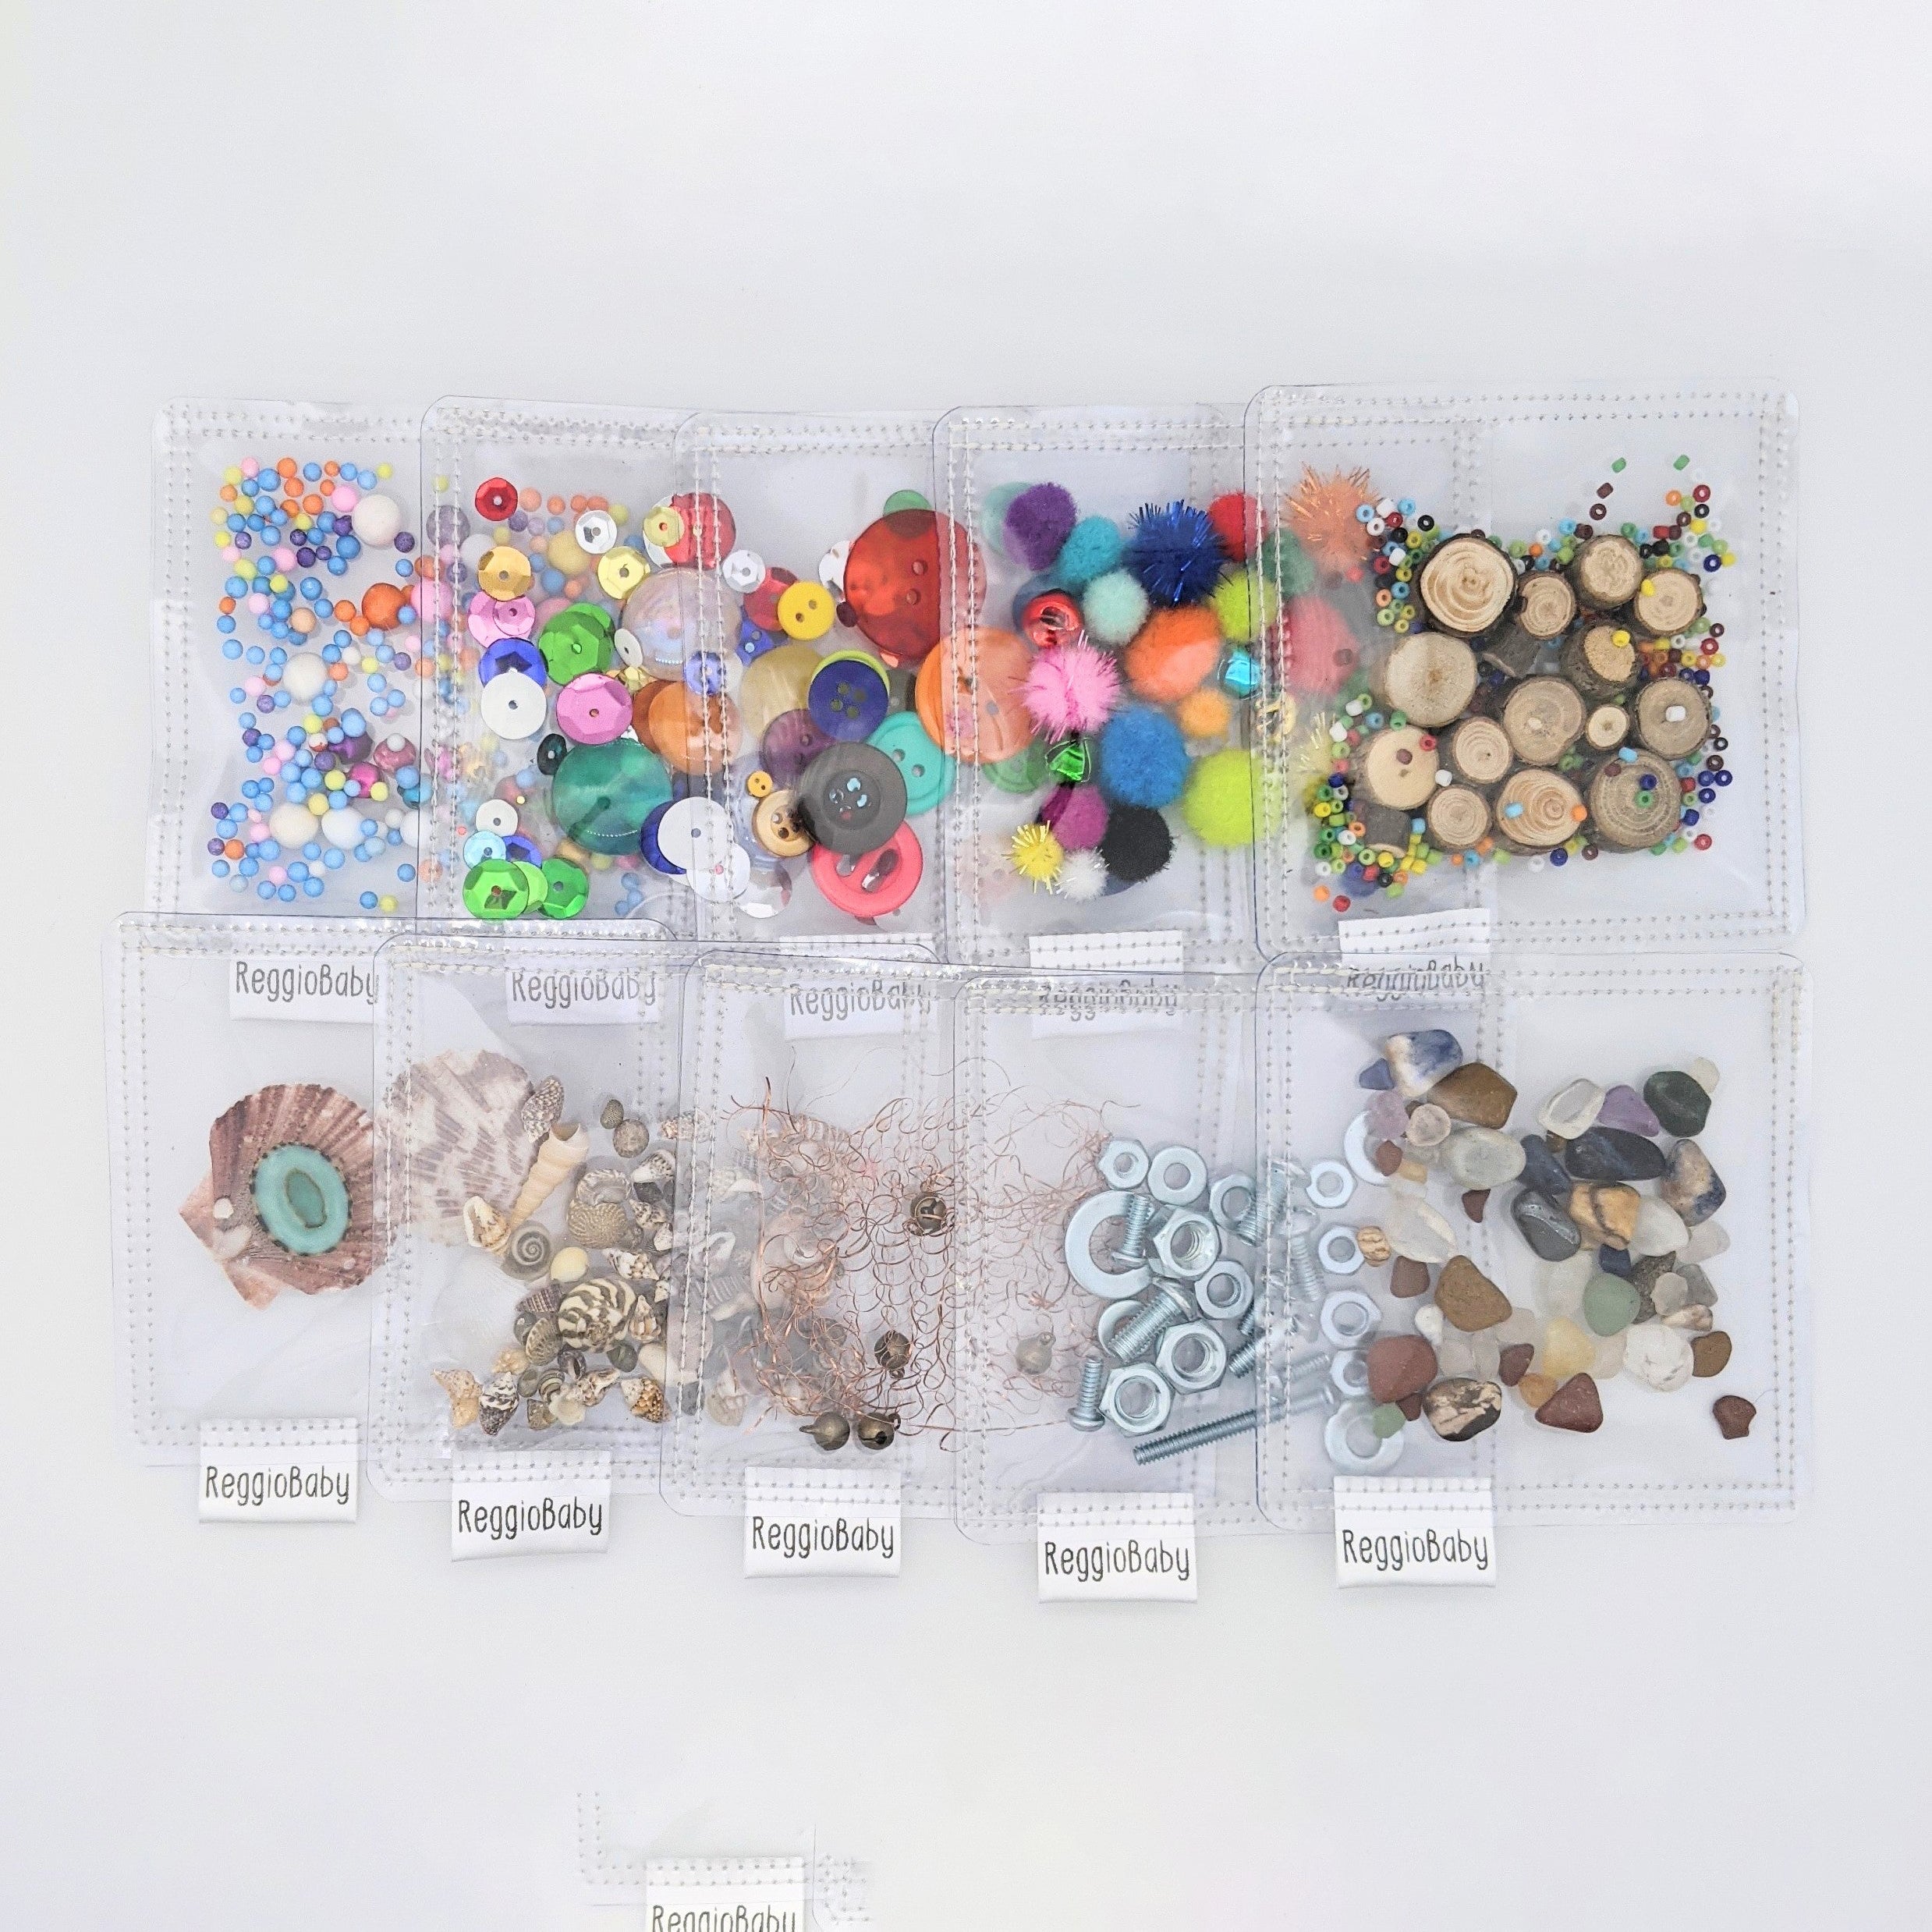 Clear Sensory Toy Multi-Packs with a Variety of Natural, Colorful, and Shiny Materials